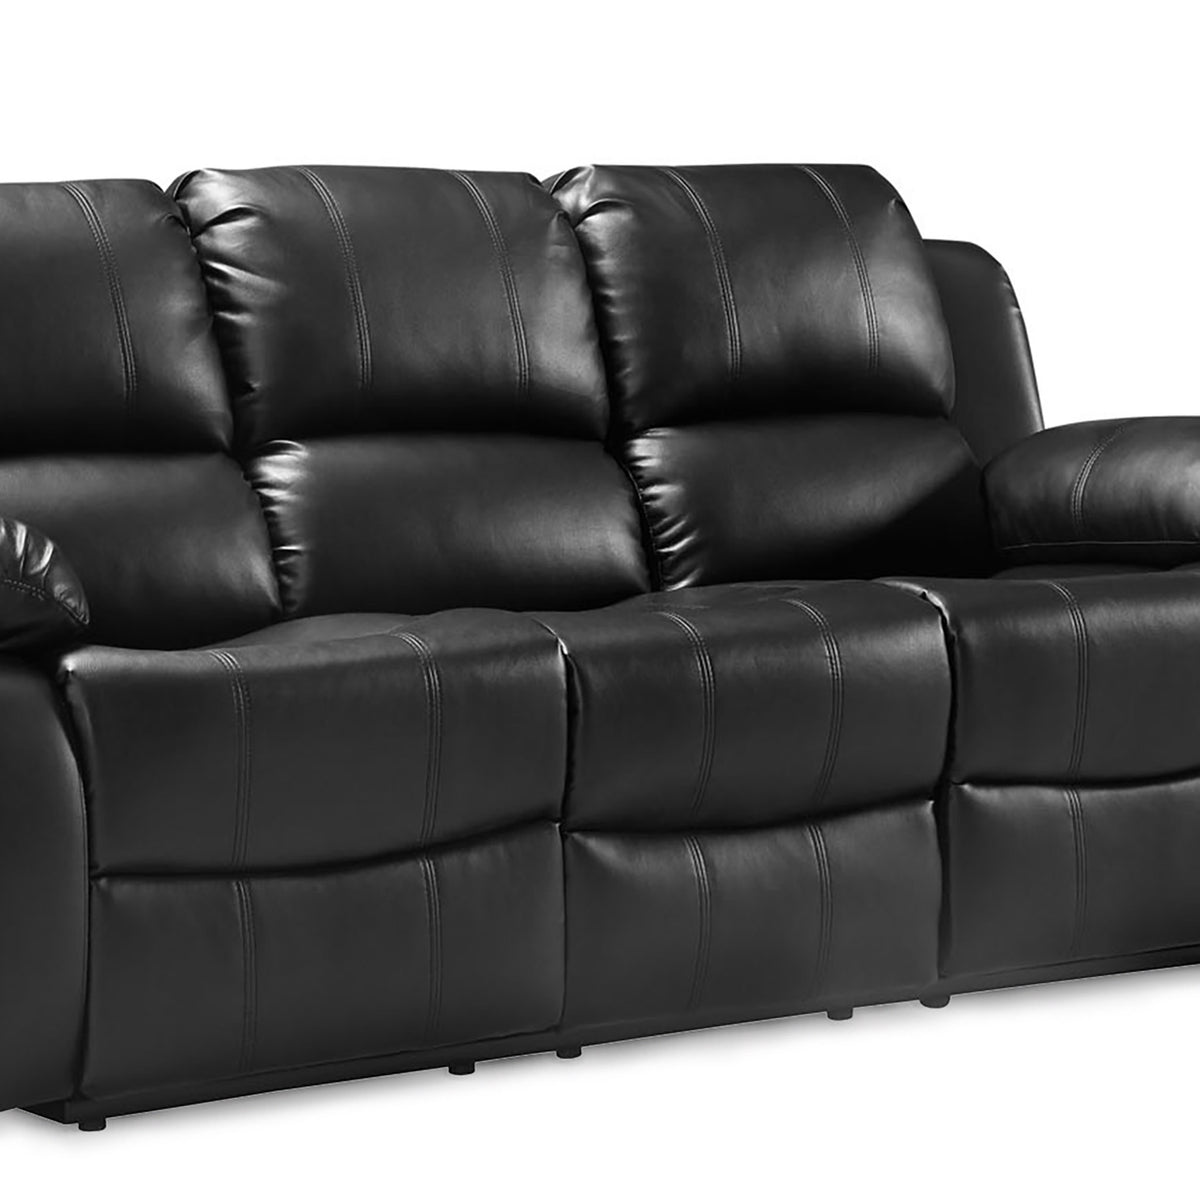 Valencia Black 3 Seater Reclining Air Leather Sofa - Close up of seating